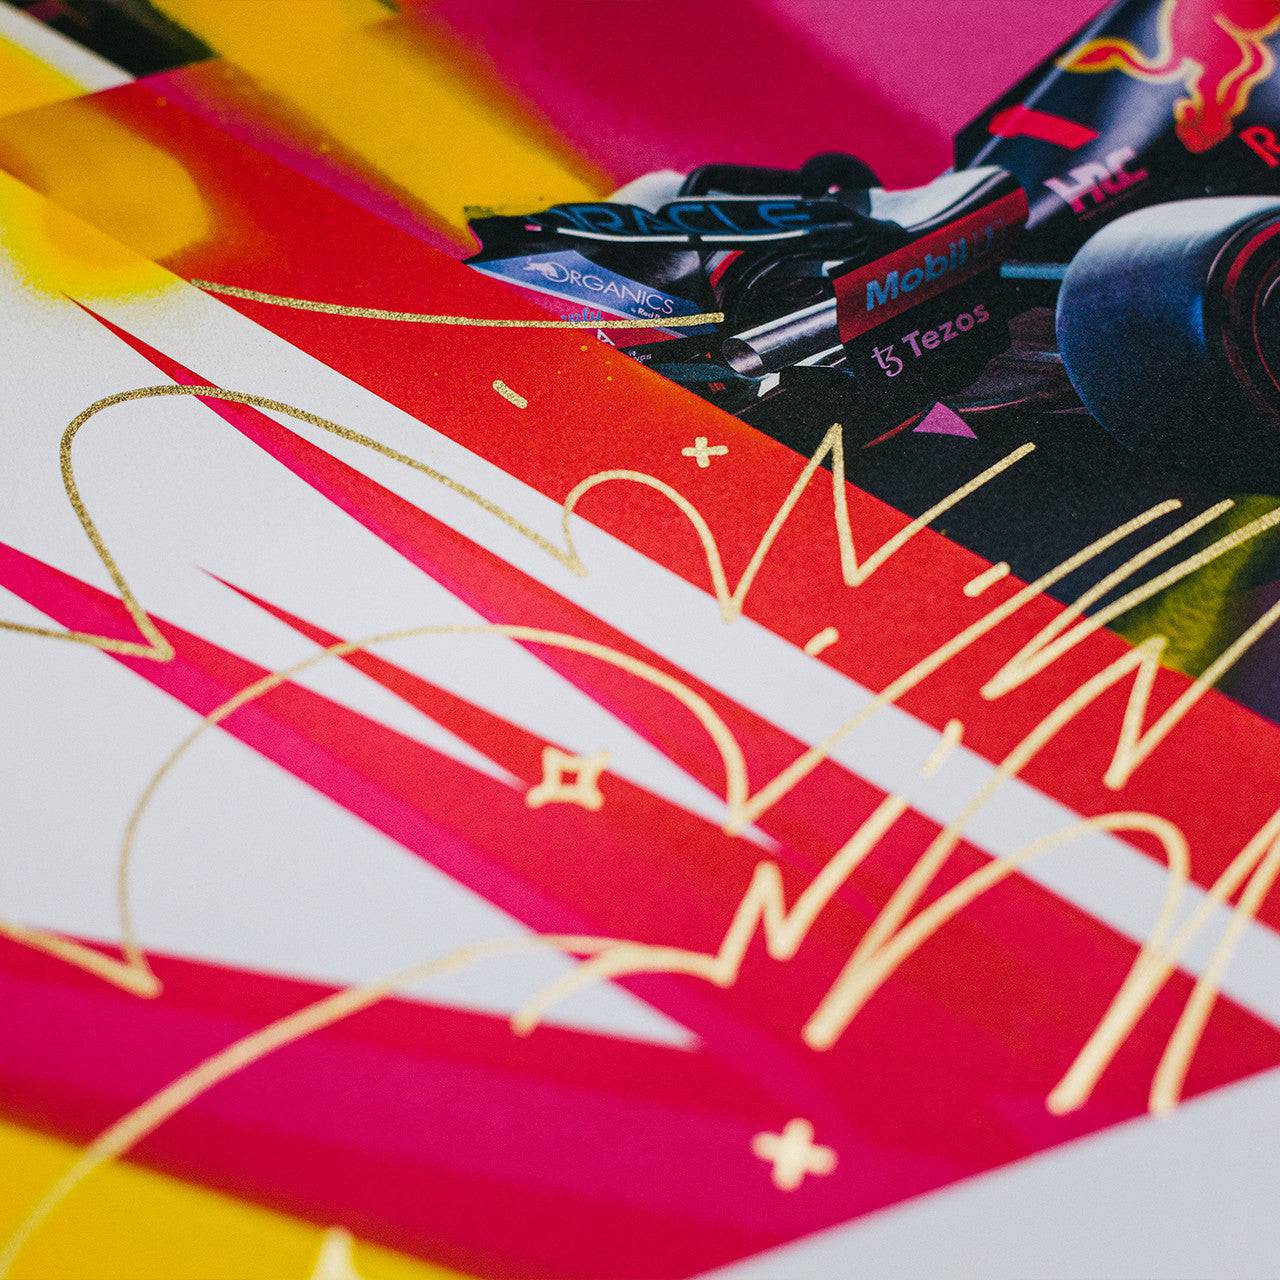 Oracle Red Bull Racing - Max Verstappen - Art to the Max - 2022 | Art Edition | #21/25